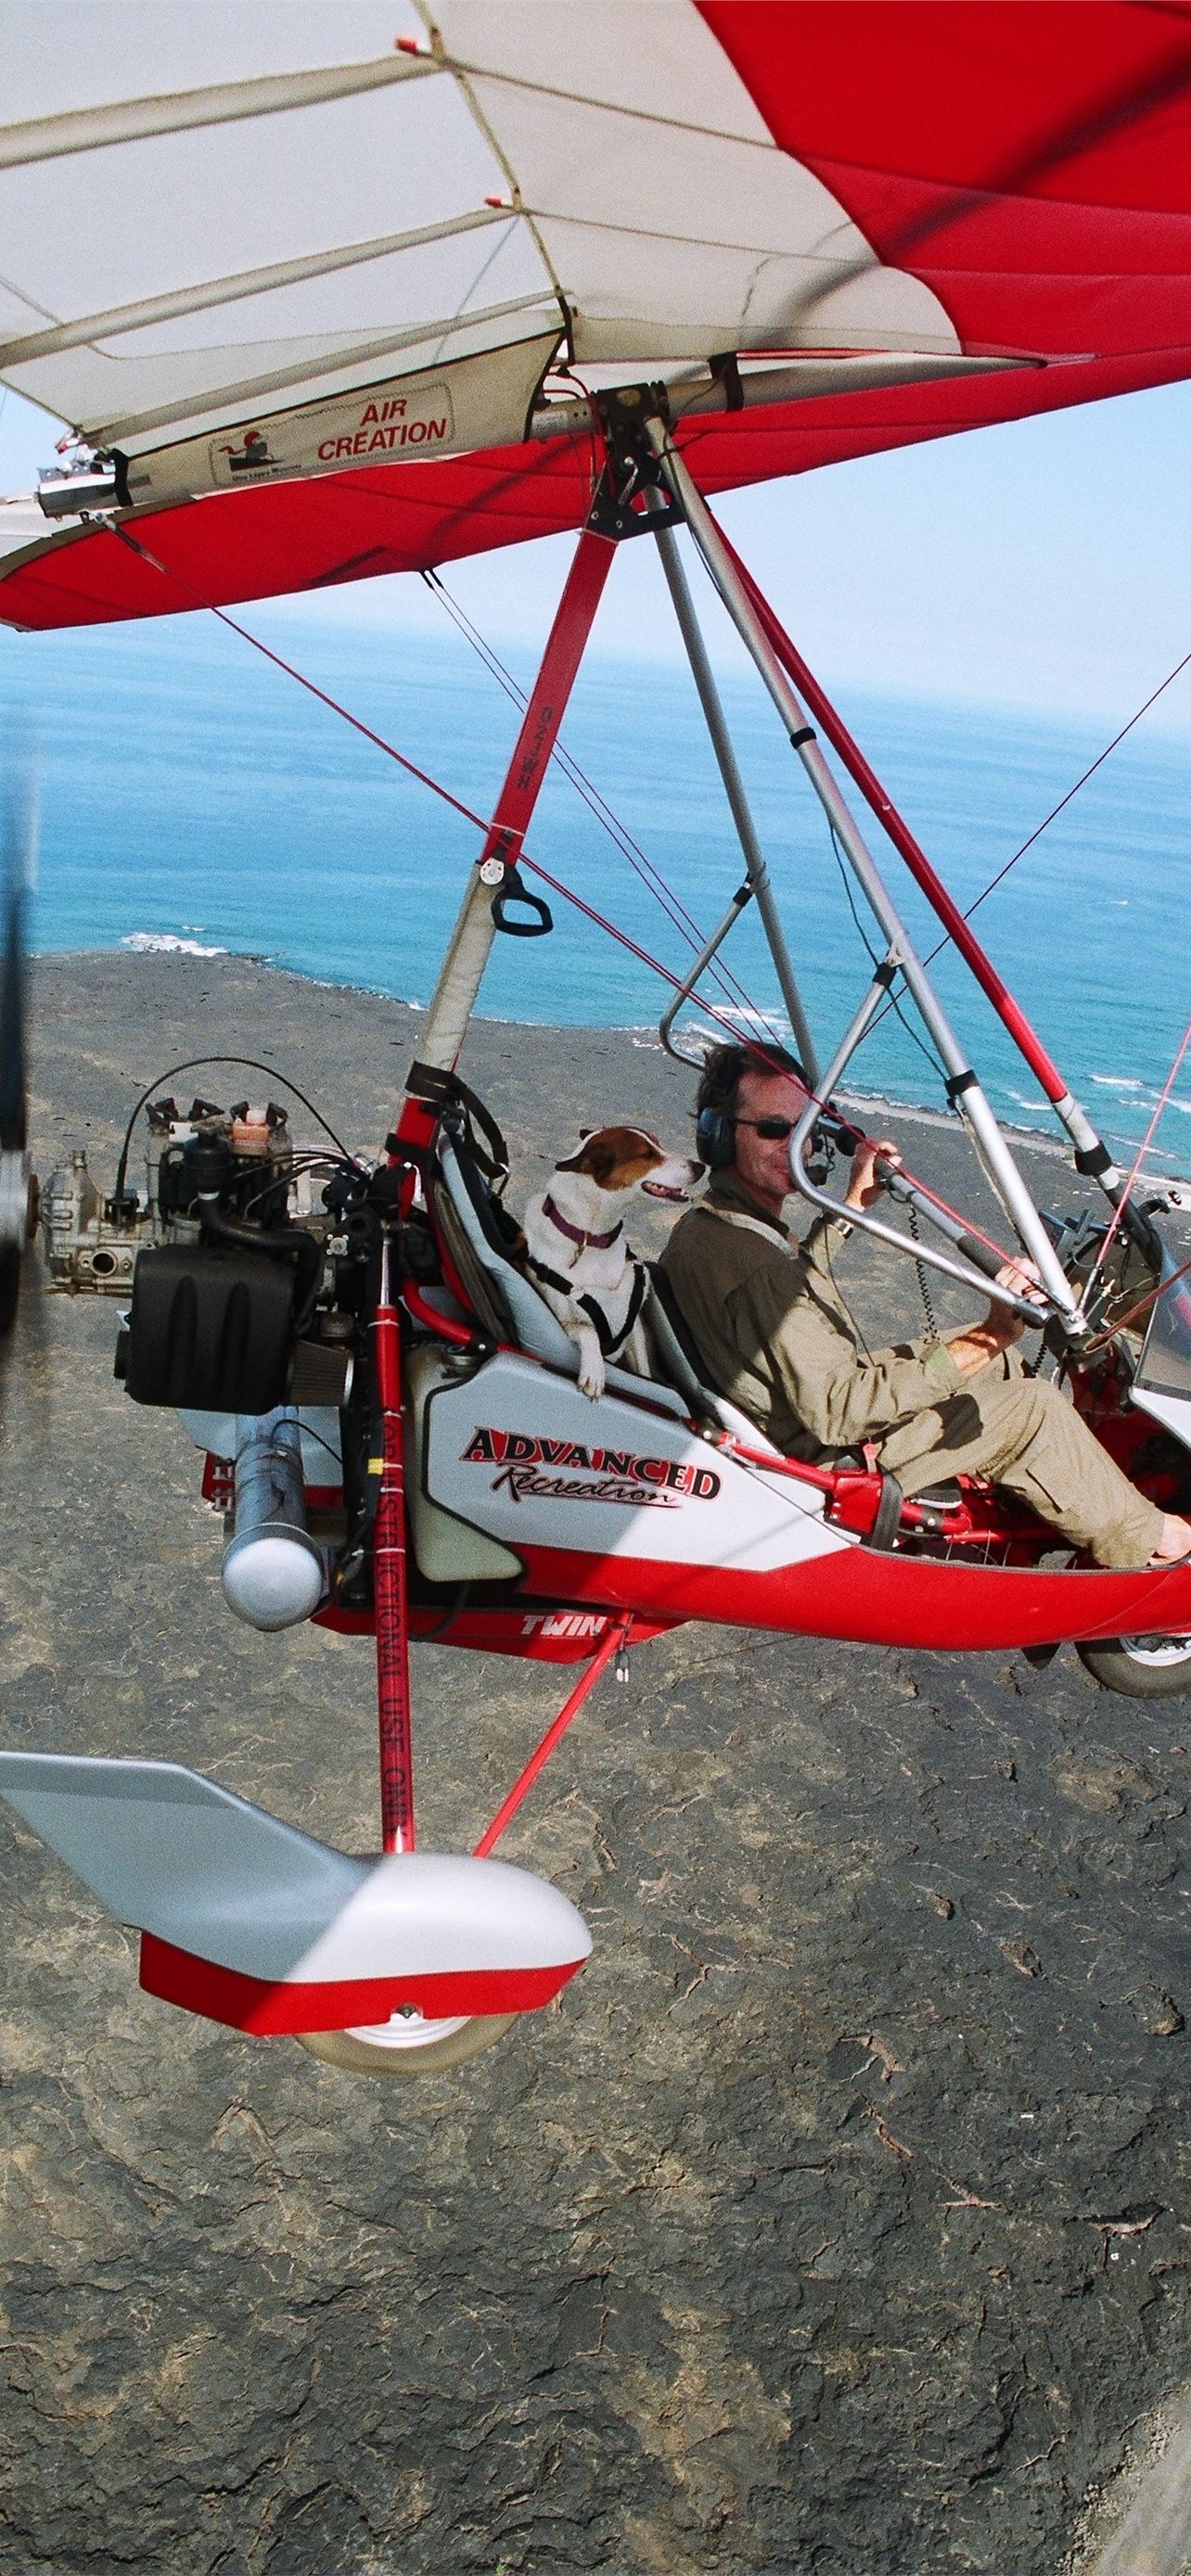 Hang Gliding: A specially designed ultralight aircraft, The jet hang glider. 1290x2780 HD Background.